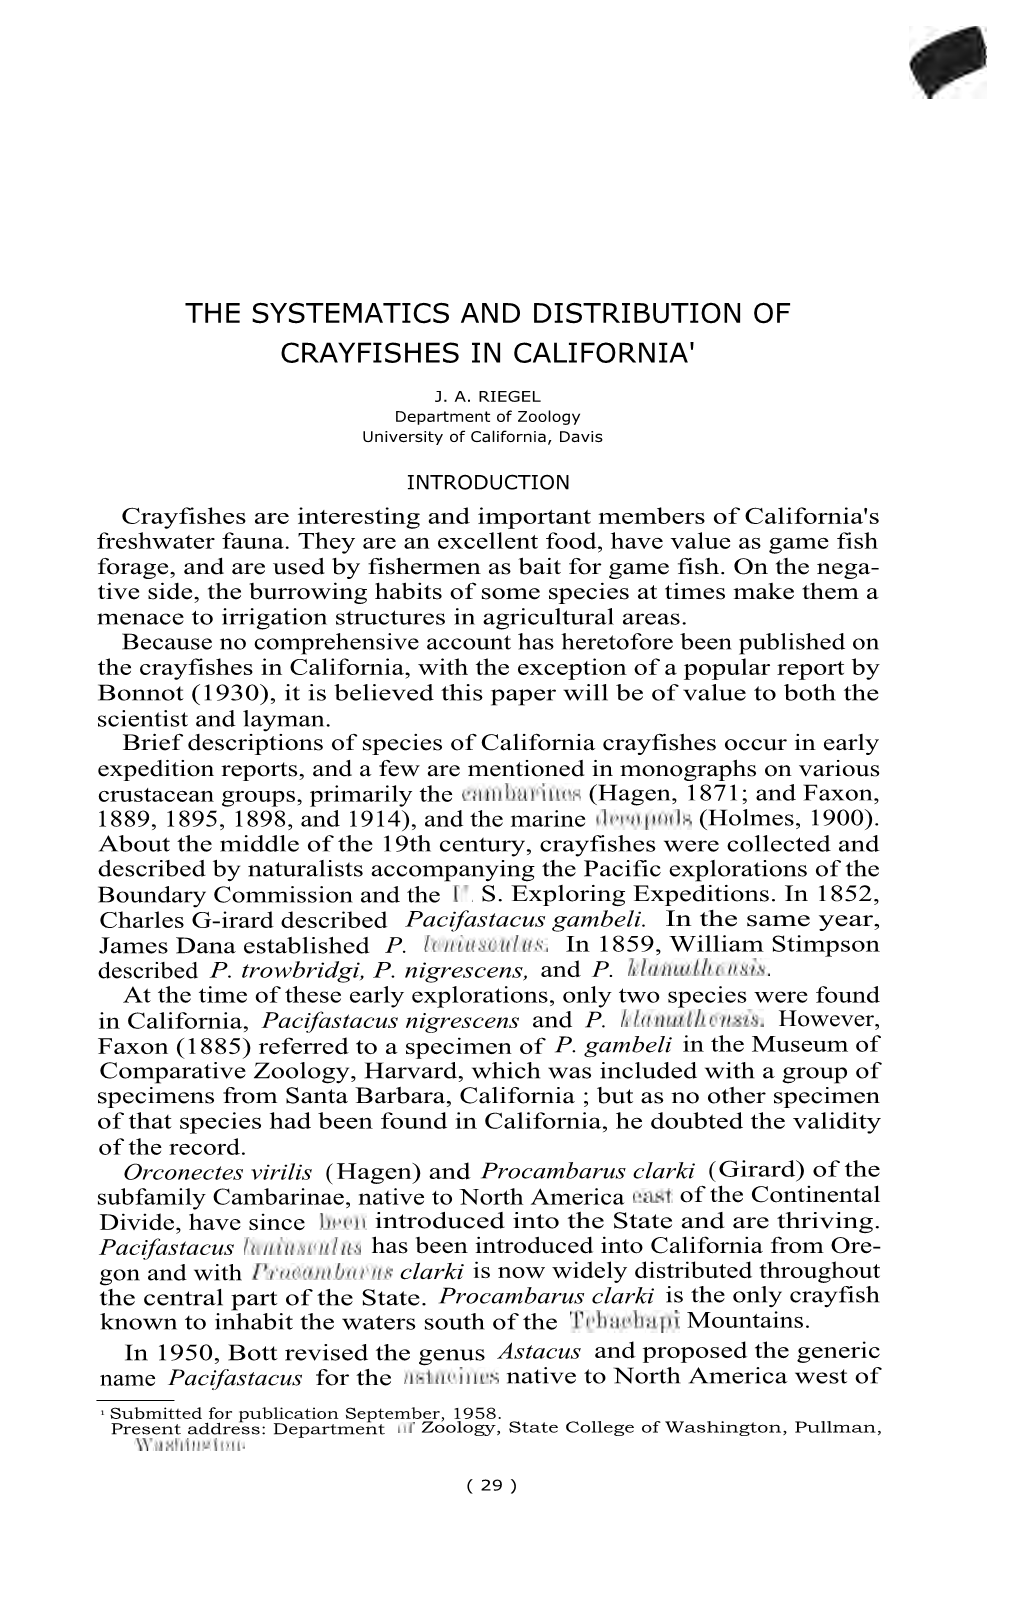 The Systematics and Distribution of Crayfishes in California'